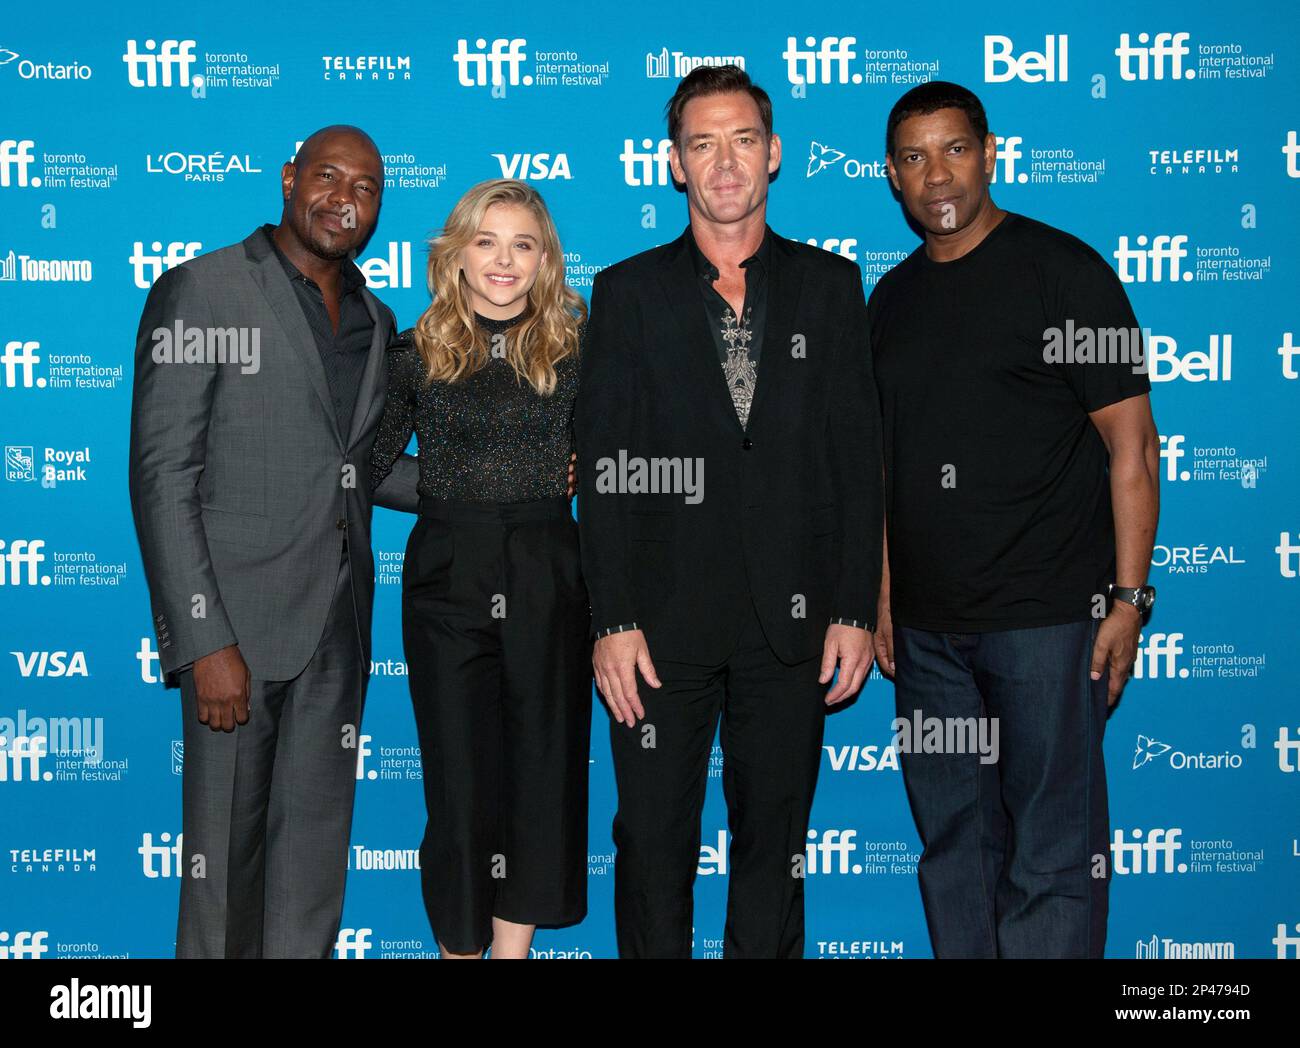 Director Antoine Fuqua, from left, actors Chloe Grace Moretz, Marton  Csokas, and Denzel Washington pose at a photo call for"The Equalizer" at  the 2014 Toronto International Film Festival in Toronto on Sunday,